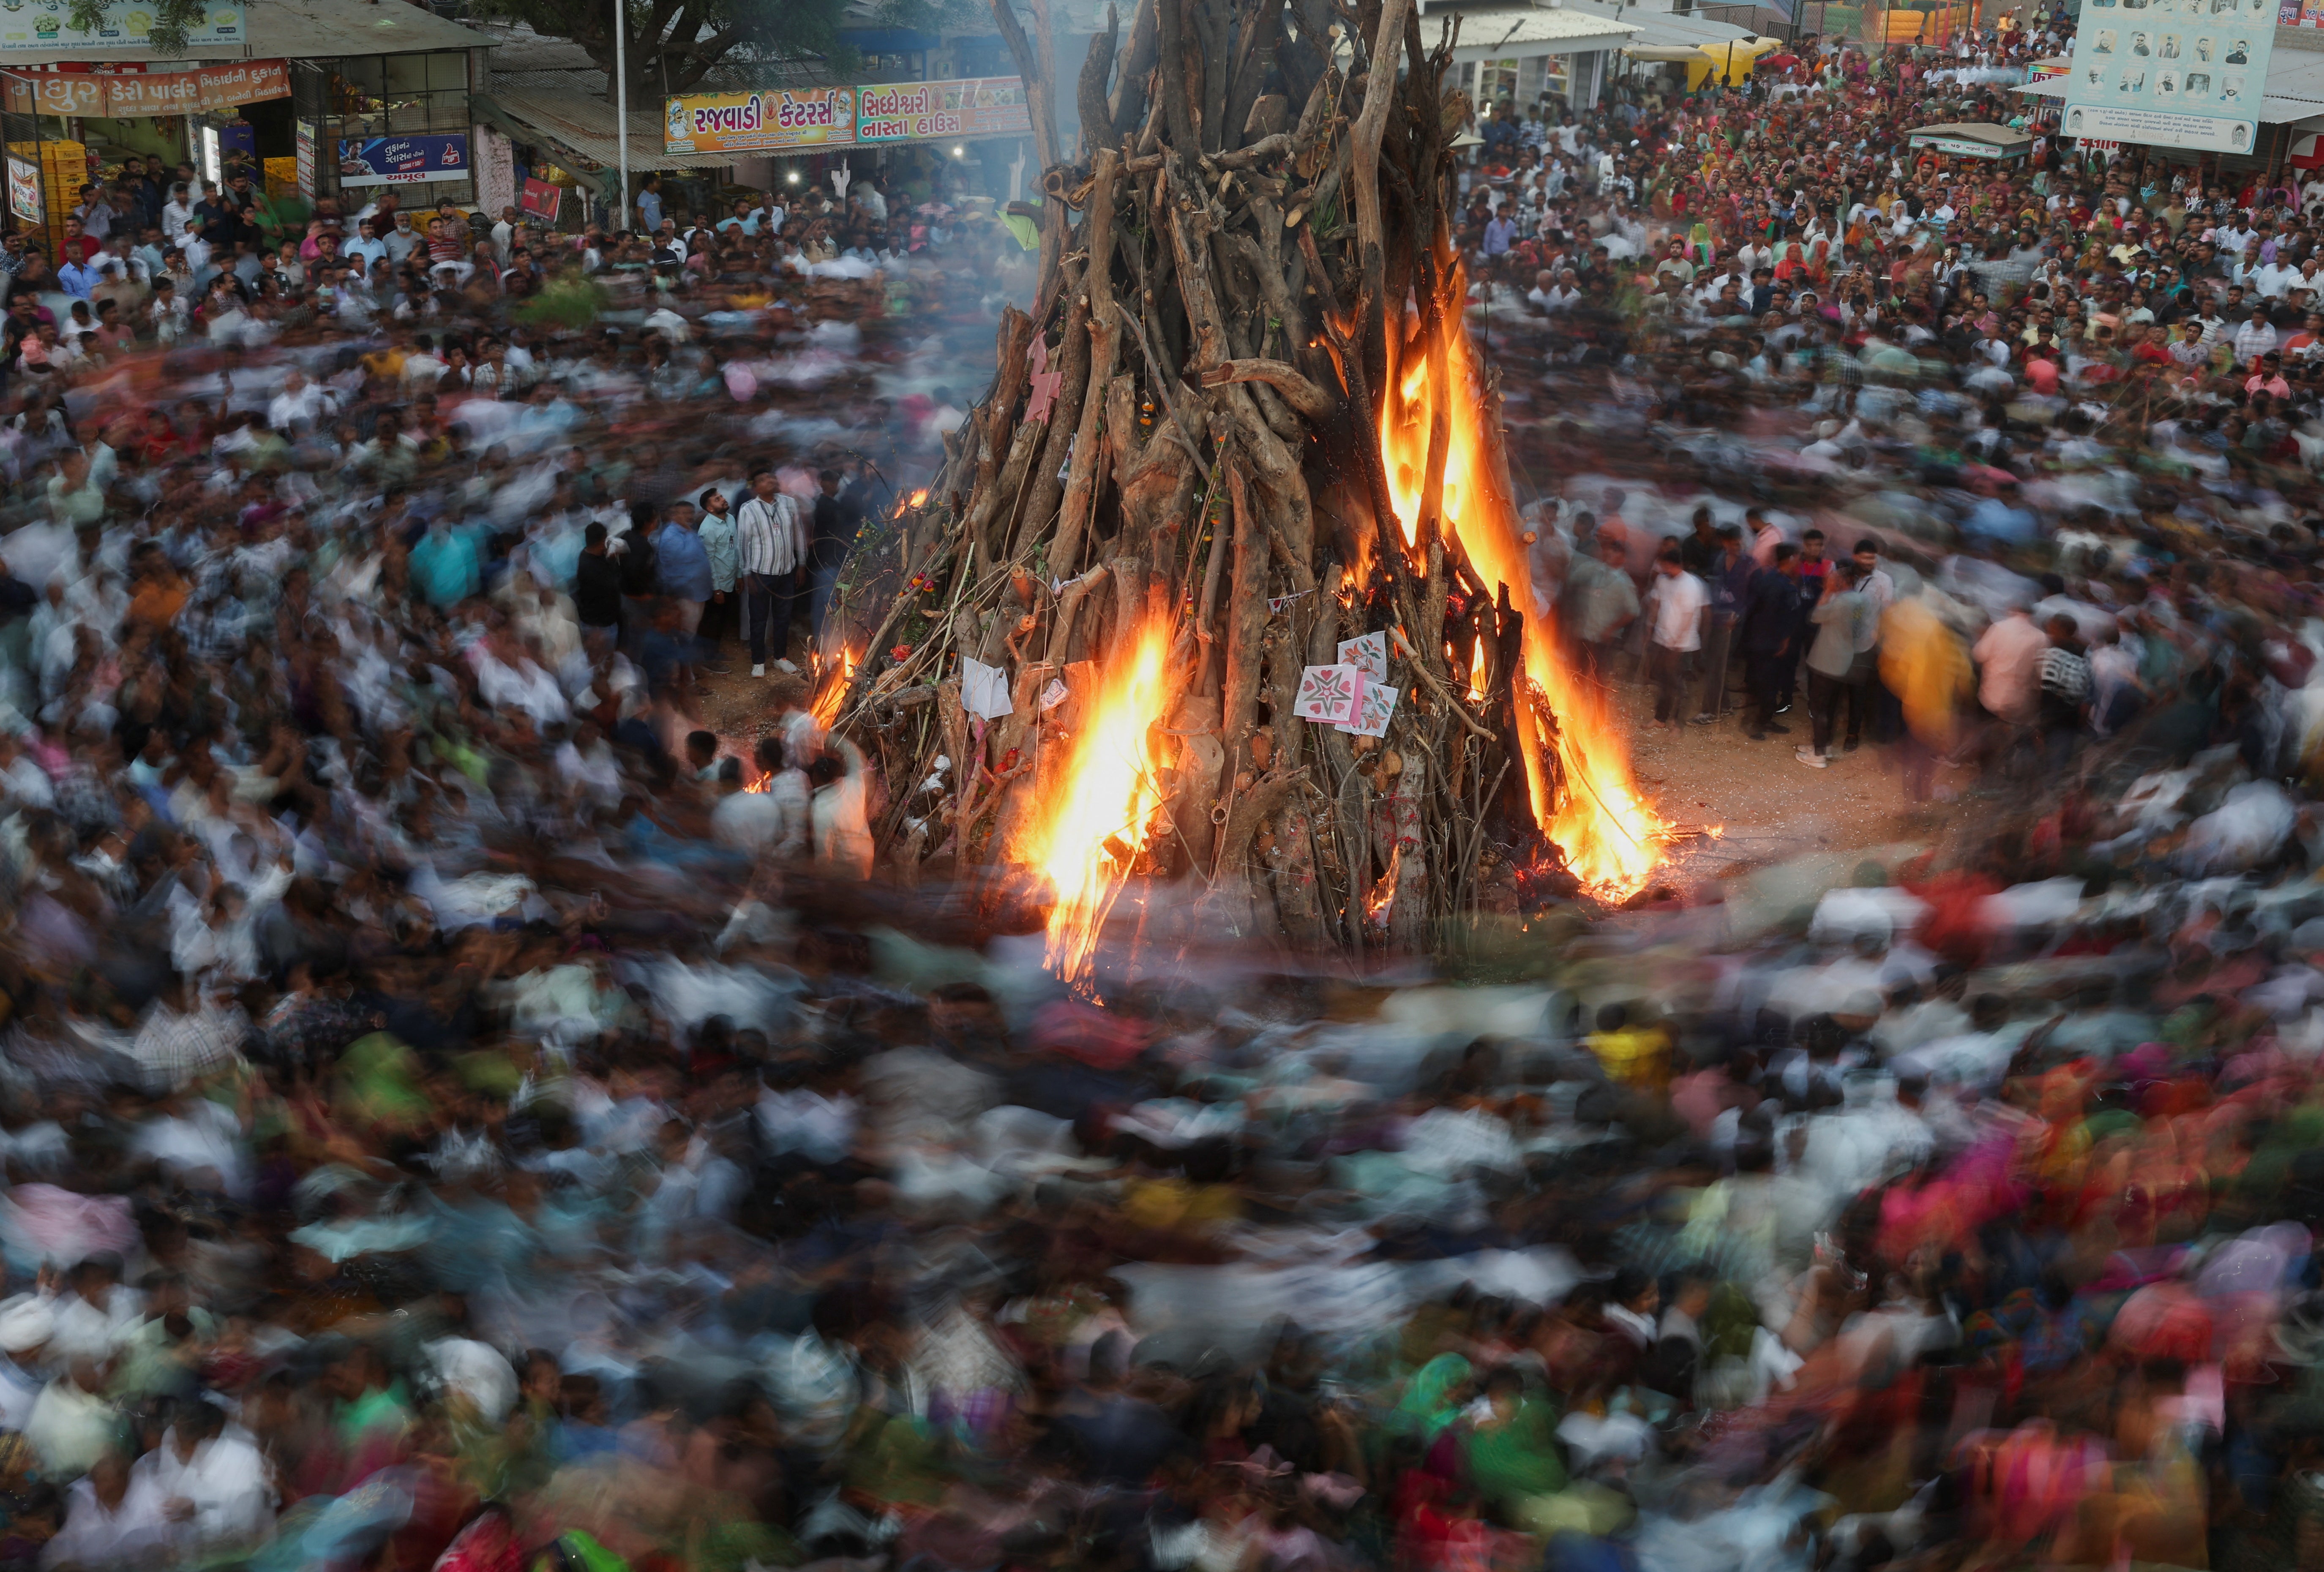 File. Hindus walk around a bonfire during a ritual as part of the Holi festival celebrations in Ahmedabad, India